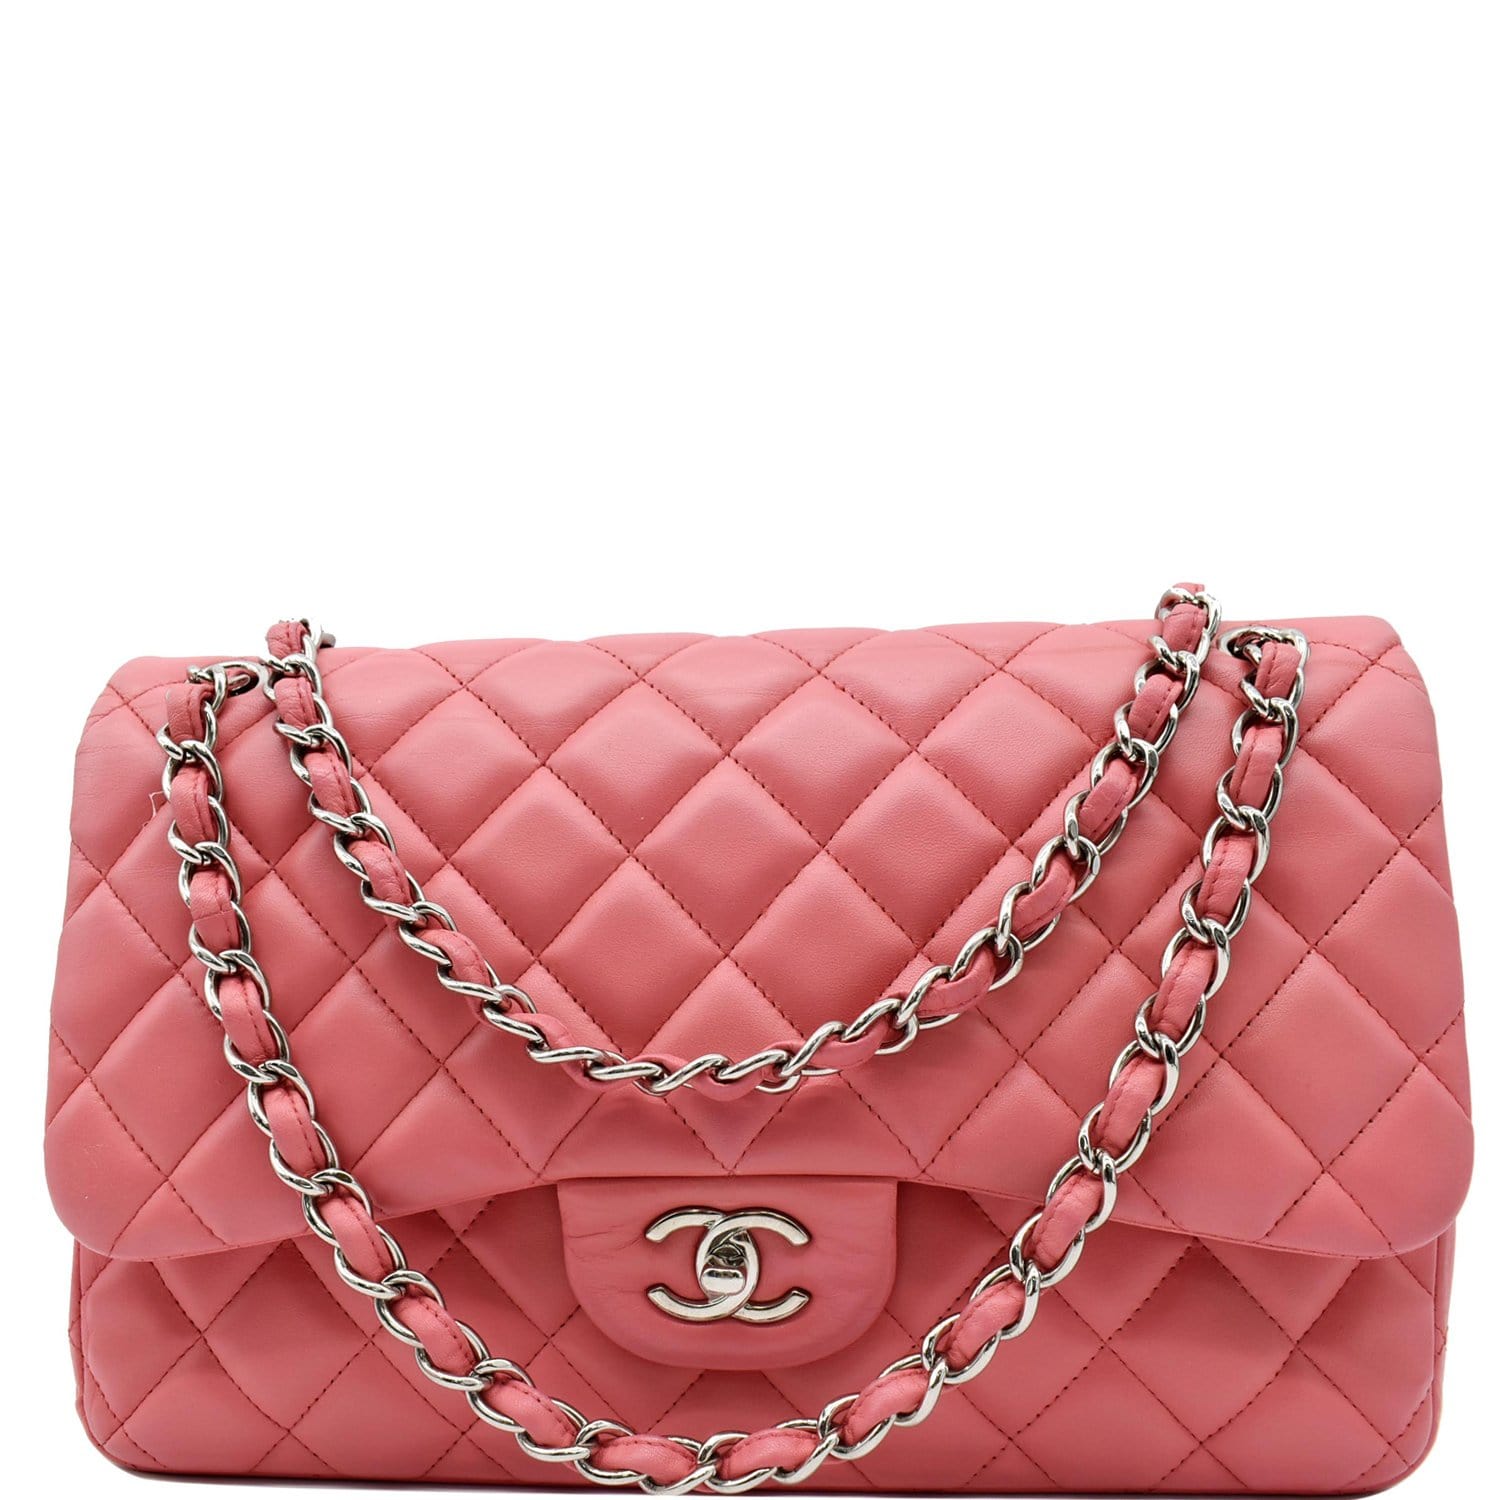 Snag the Latest CHANEL Pink Leather Exterior Bags & Handbags for